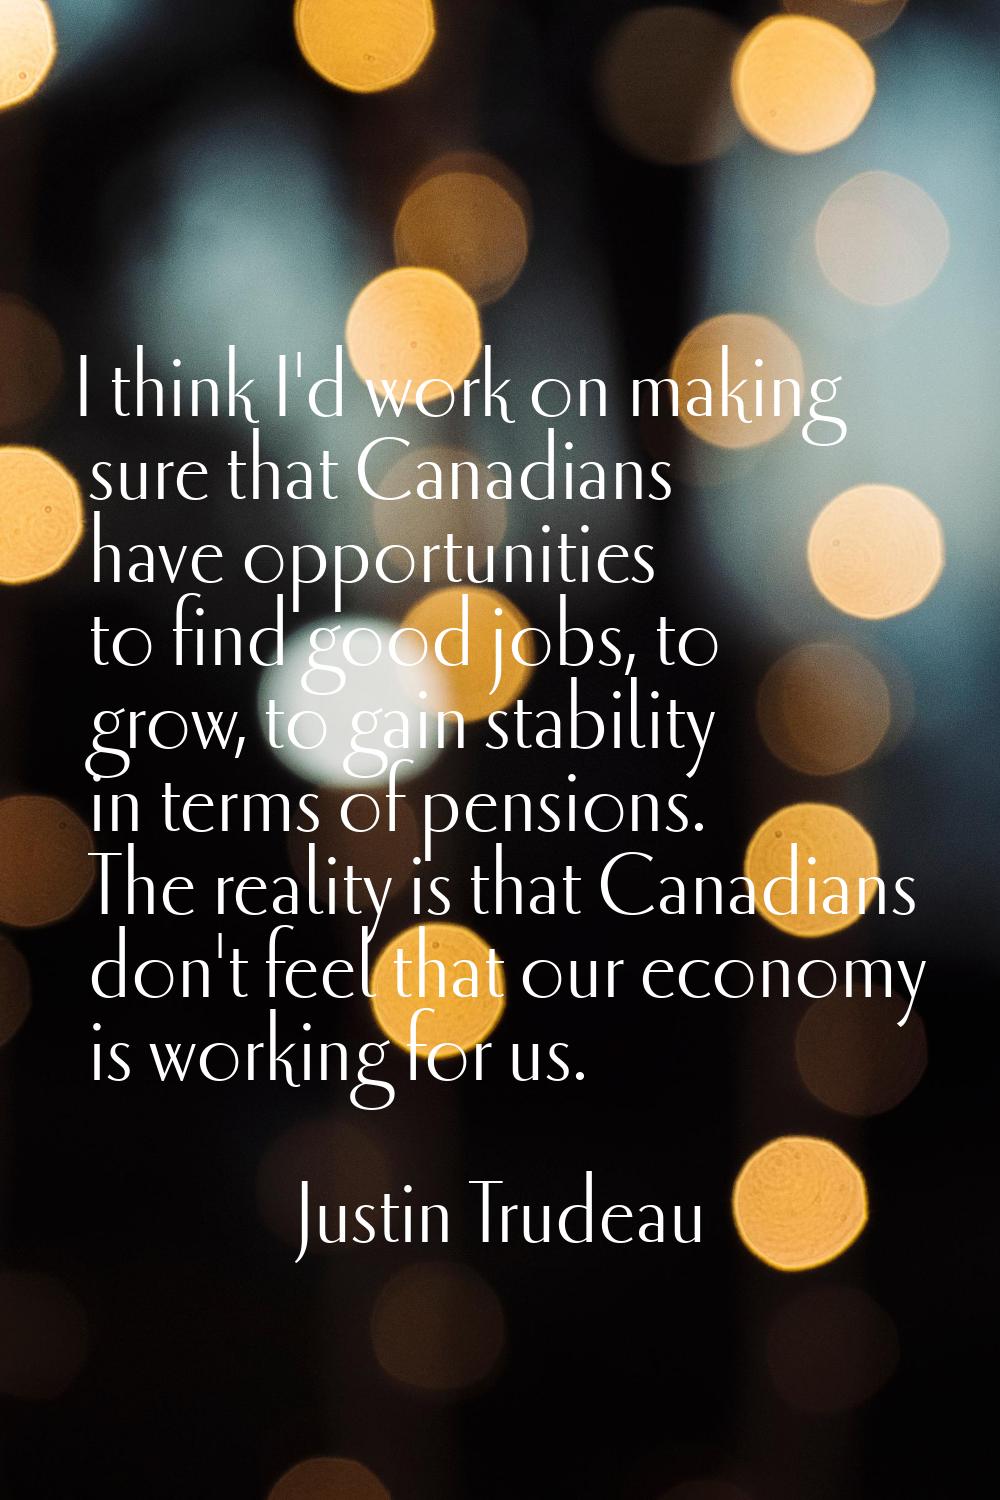 I think I'd work on making sure that Canadians have opportunities to find good jobs, to grow, to ga